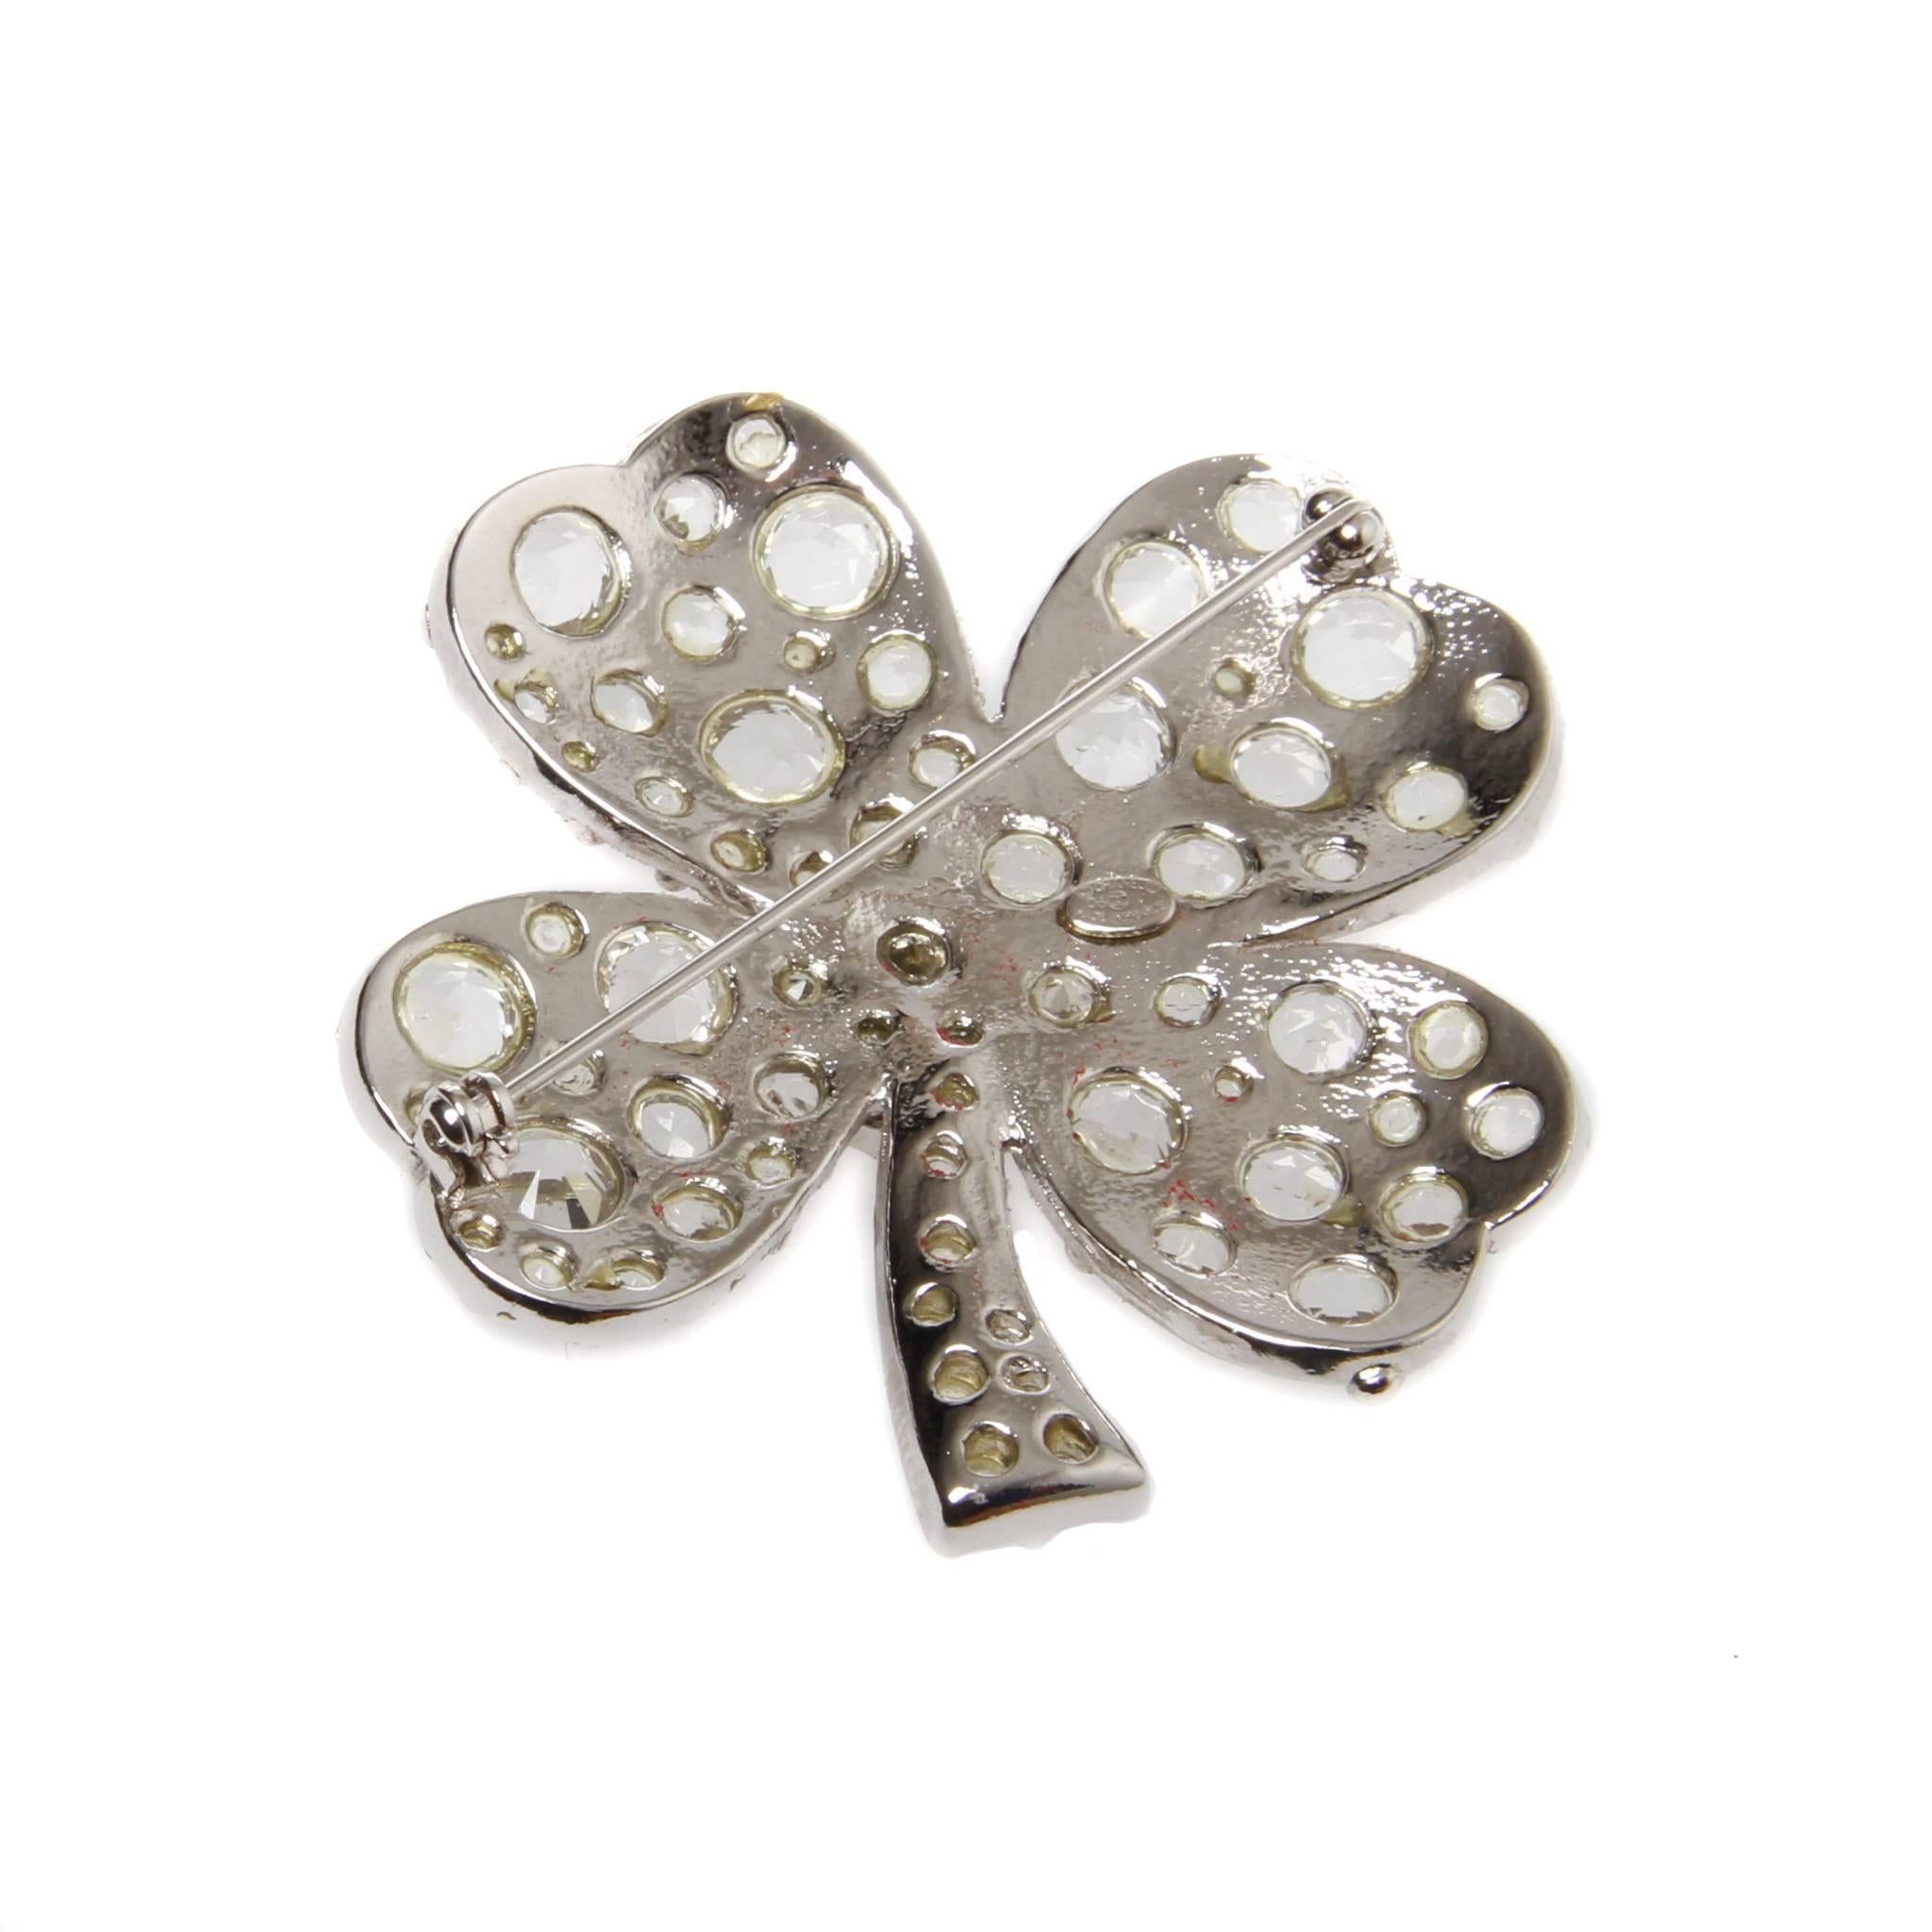 Chanel brooch featuring a Swarovski encrusted four leaf clover in silver-tone mental with the interlocking CC at its centre. 

Comes with original box

06 V - a 2006 addition to their continuous line